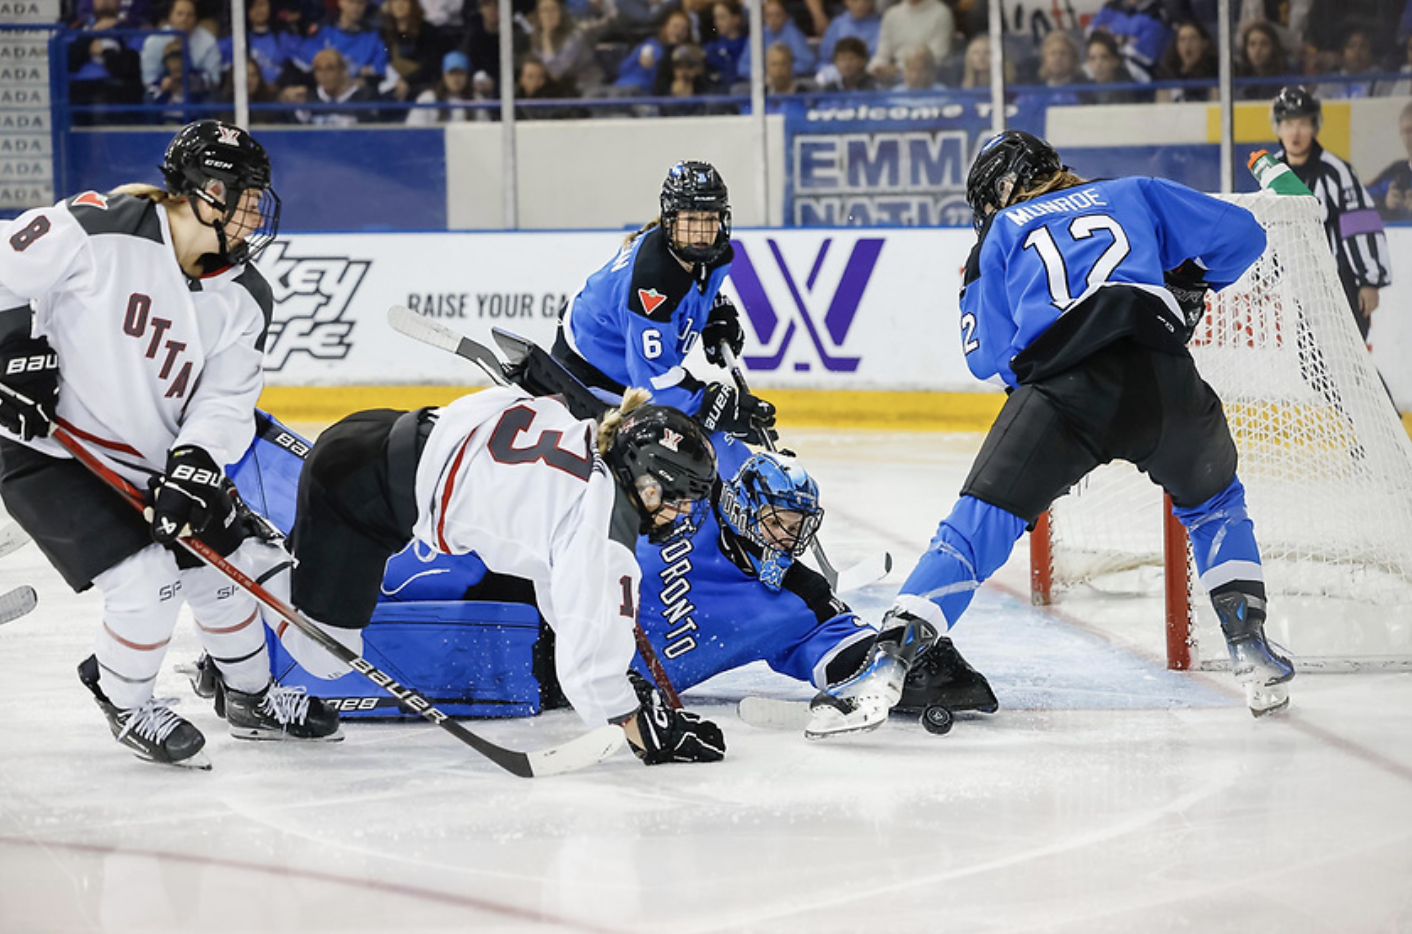 Vanišová falls over Campell while trying to score. Campbell is laying on the ice and making a save with the tip of her glove.  Vanišová is in white, while Campbell is in blue.